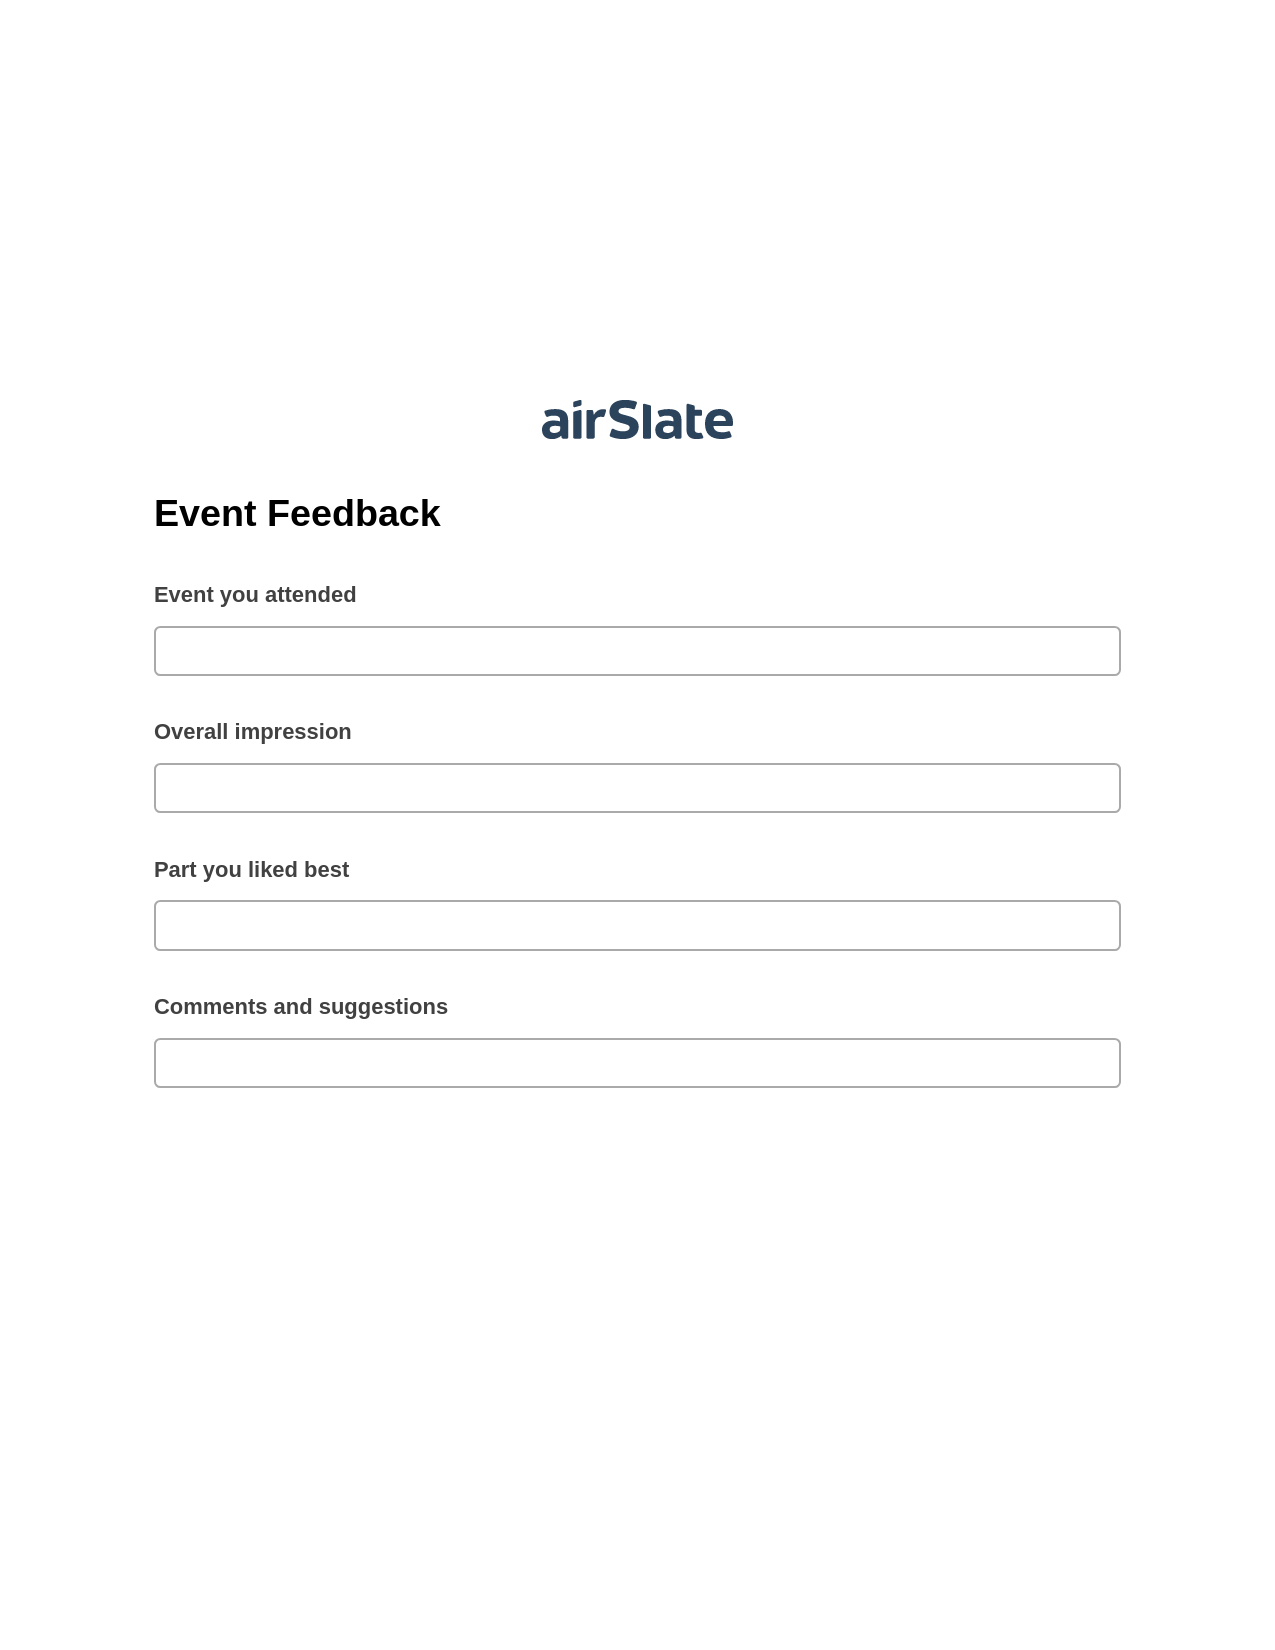 Event Feedback Pre-fill from Salesforce Records with SOQL Bot, SendGrid send Campaign bot, Dropbox Bot